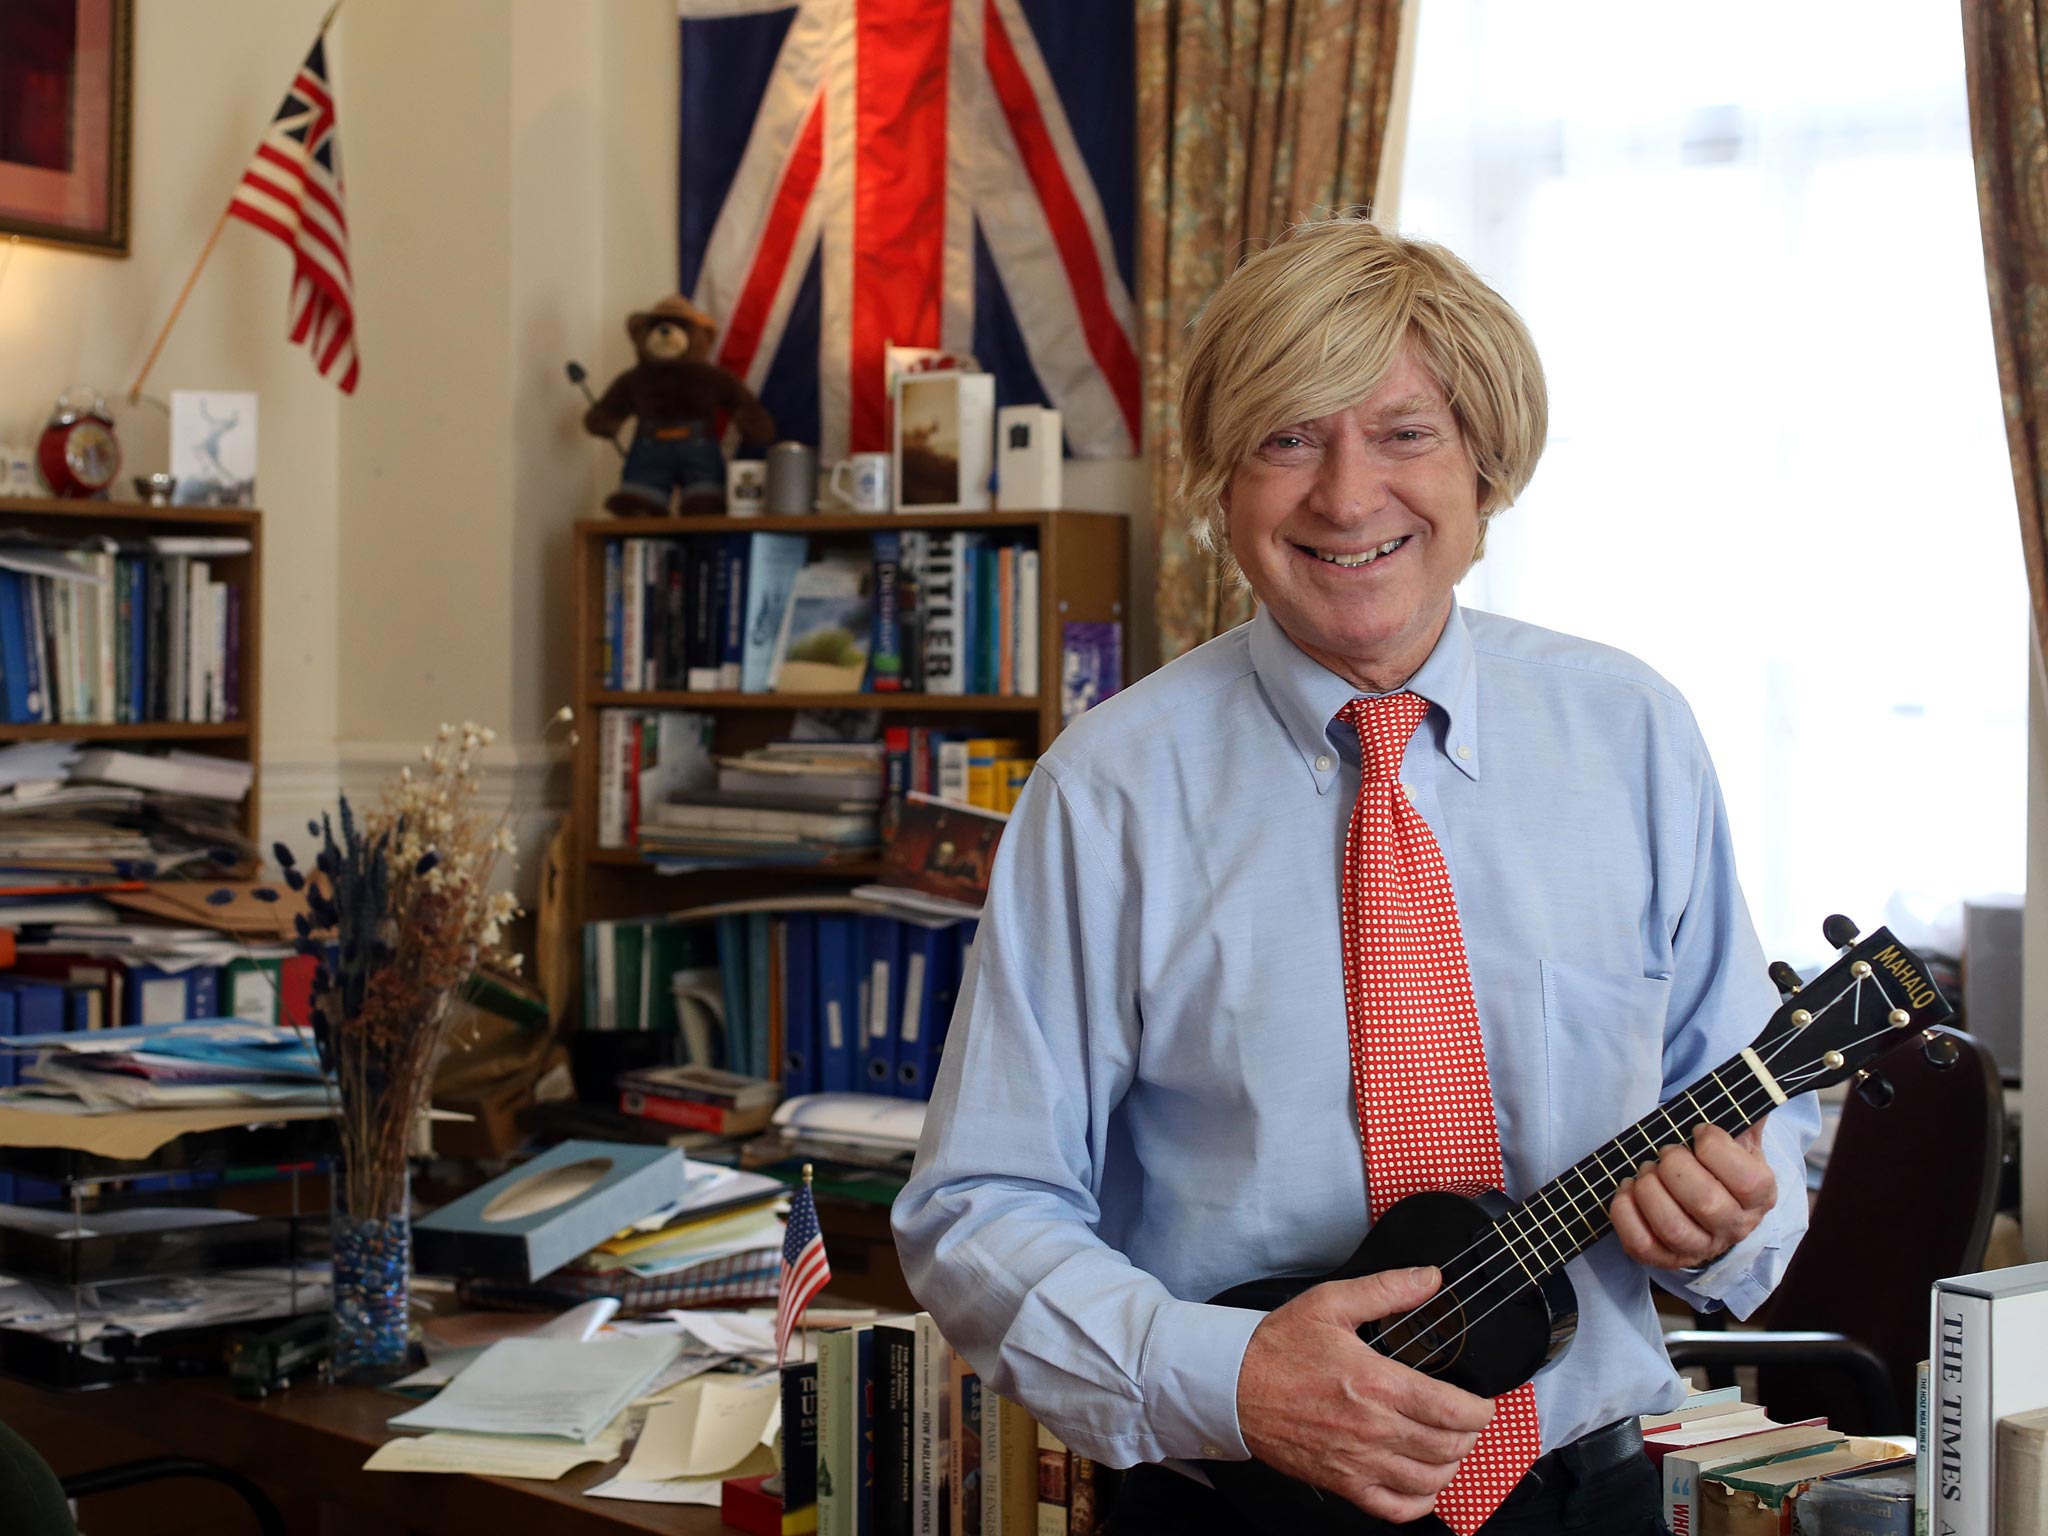 Michael Fabricant regrets tweeting about punching Yasmin Alibhai-Brown in the throat